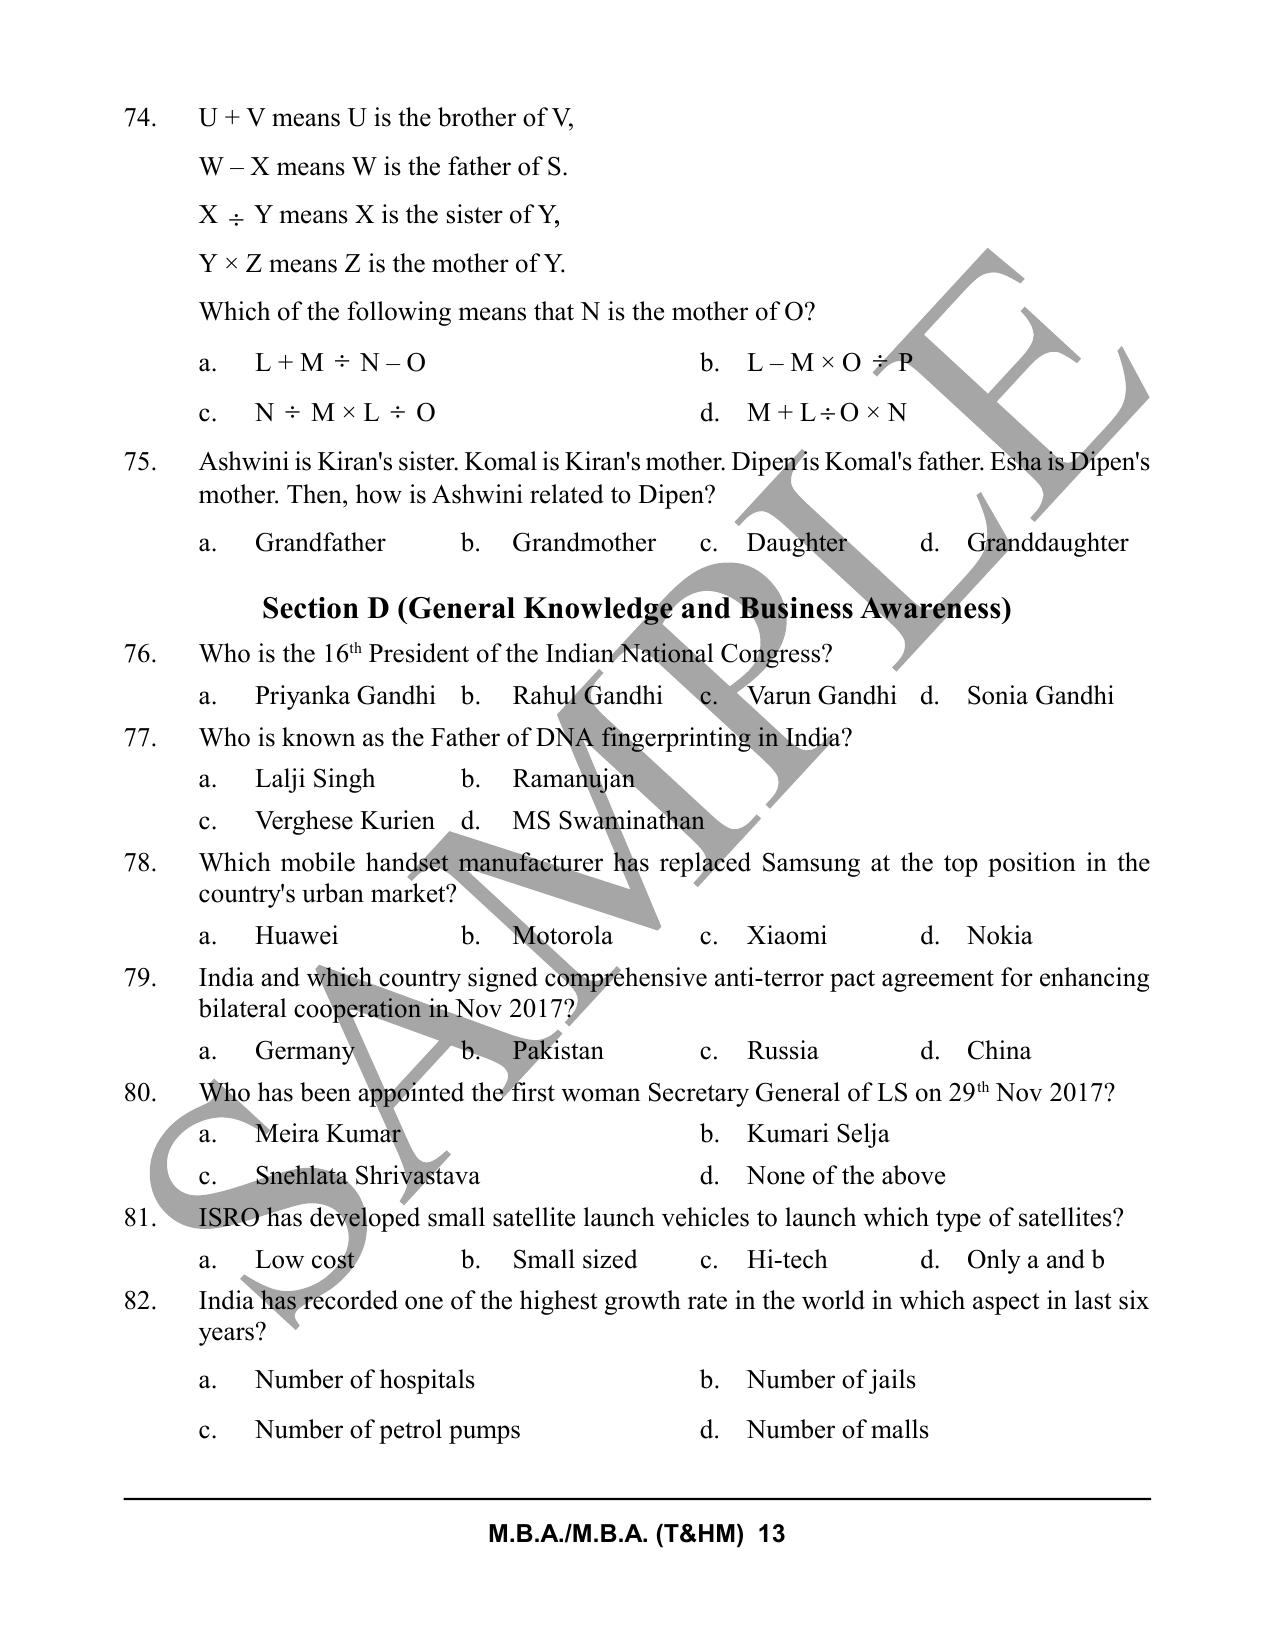 HPCET MBA and MBA (T&HM) Sample Paper 2023 Sample Paper - Page 13